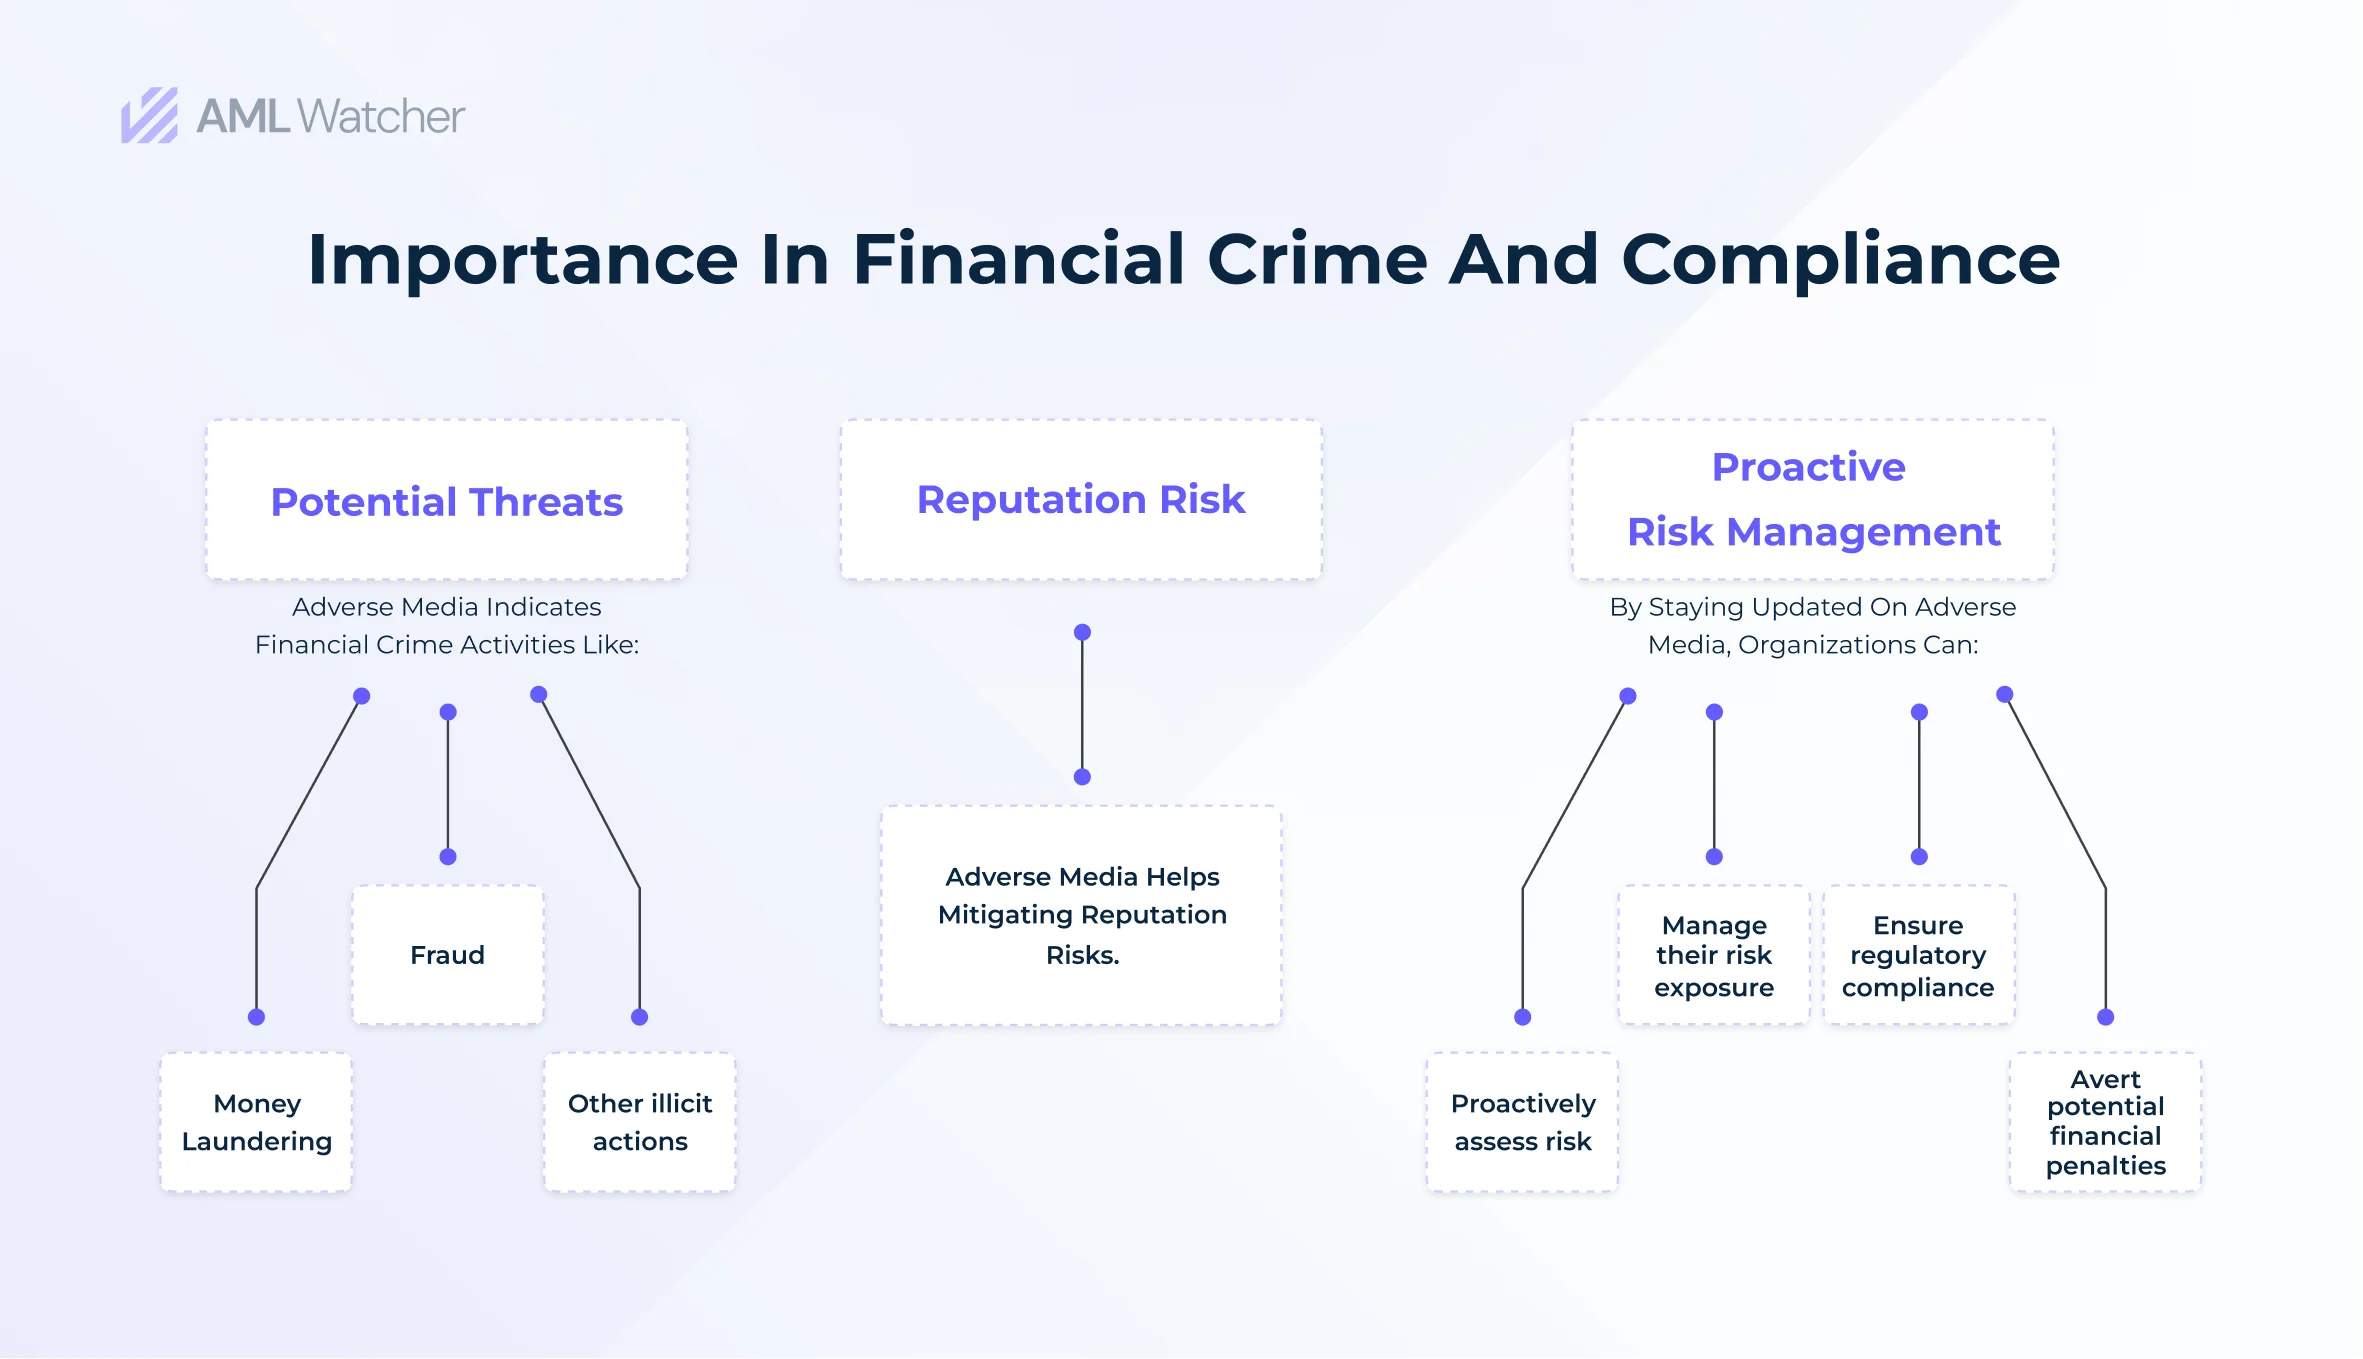 Given infographic depicts the significance in financial crime and compliance.